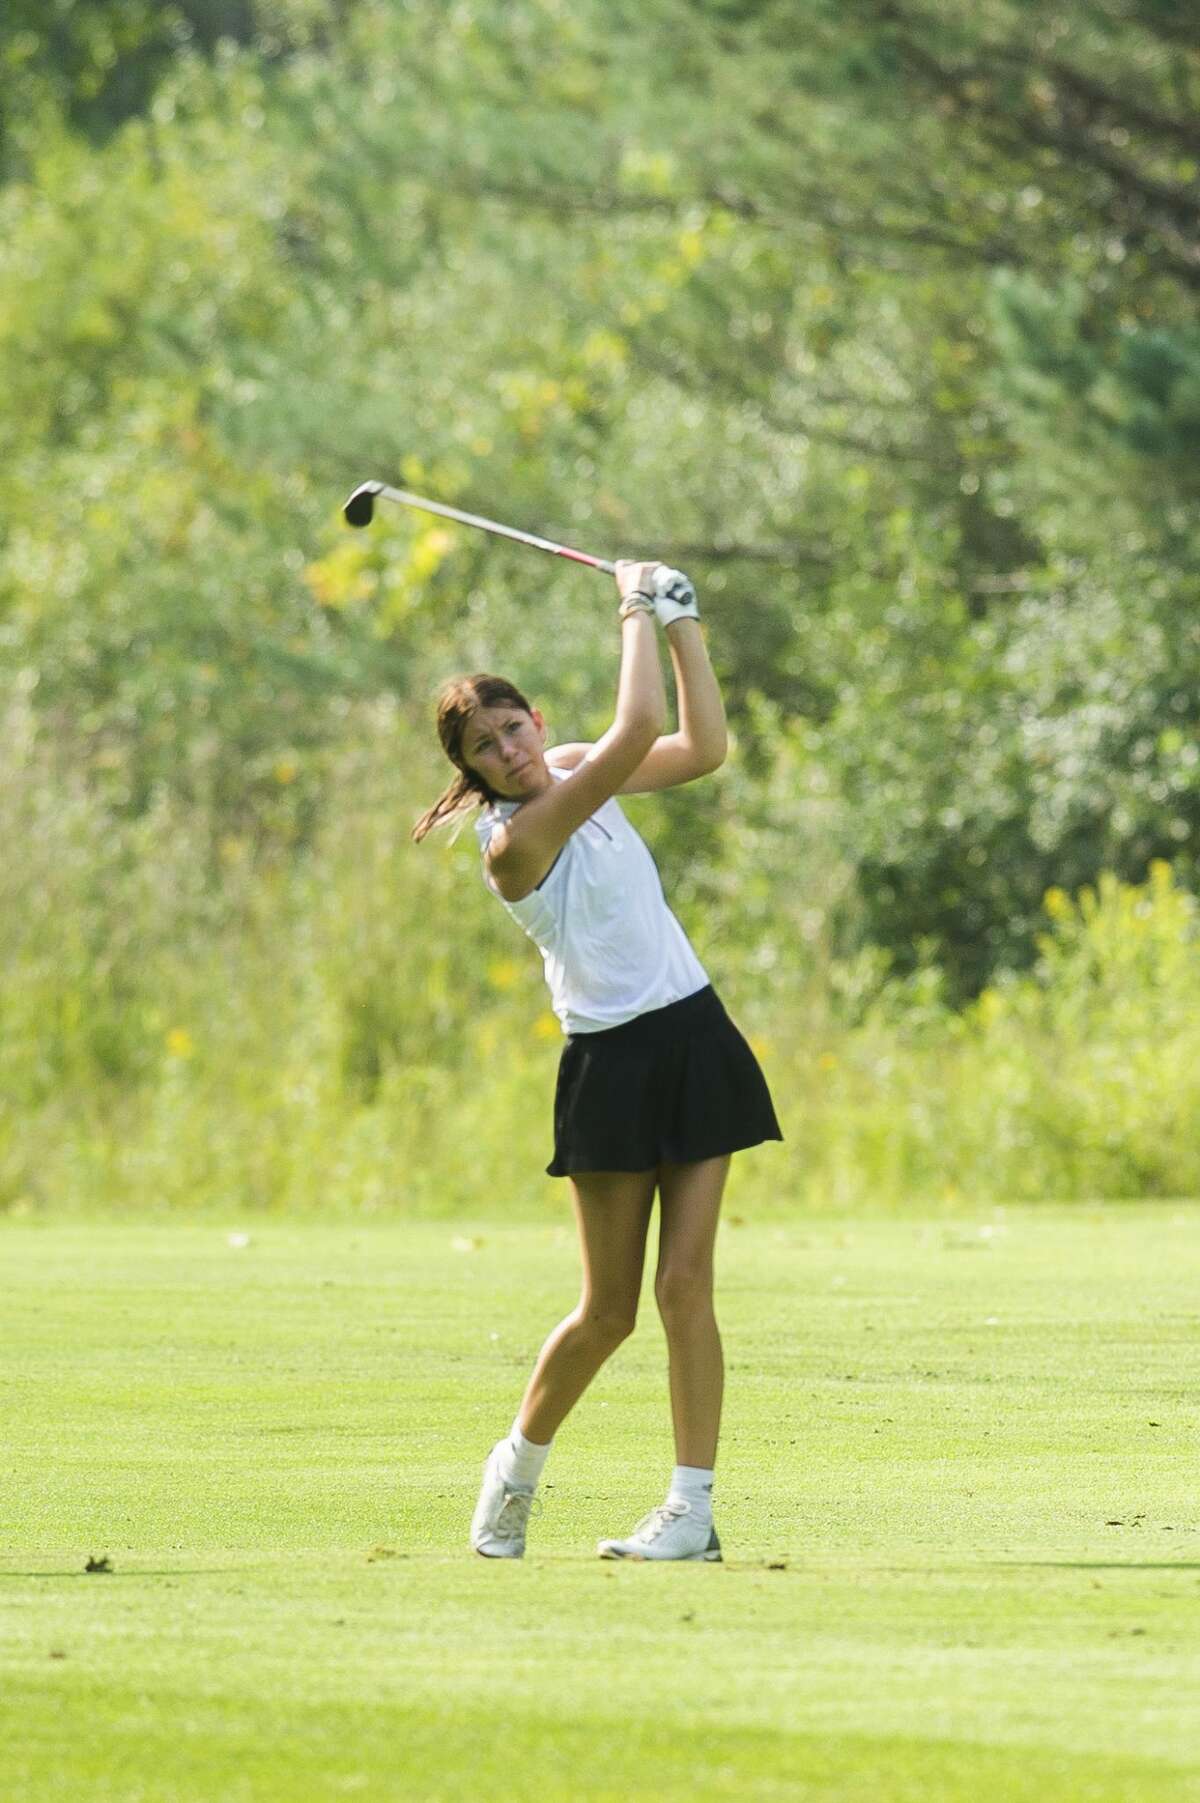 Midland, Dow girls golfers compete in Frank Altimore Invitational Aug